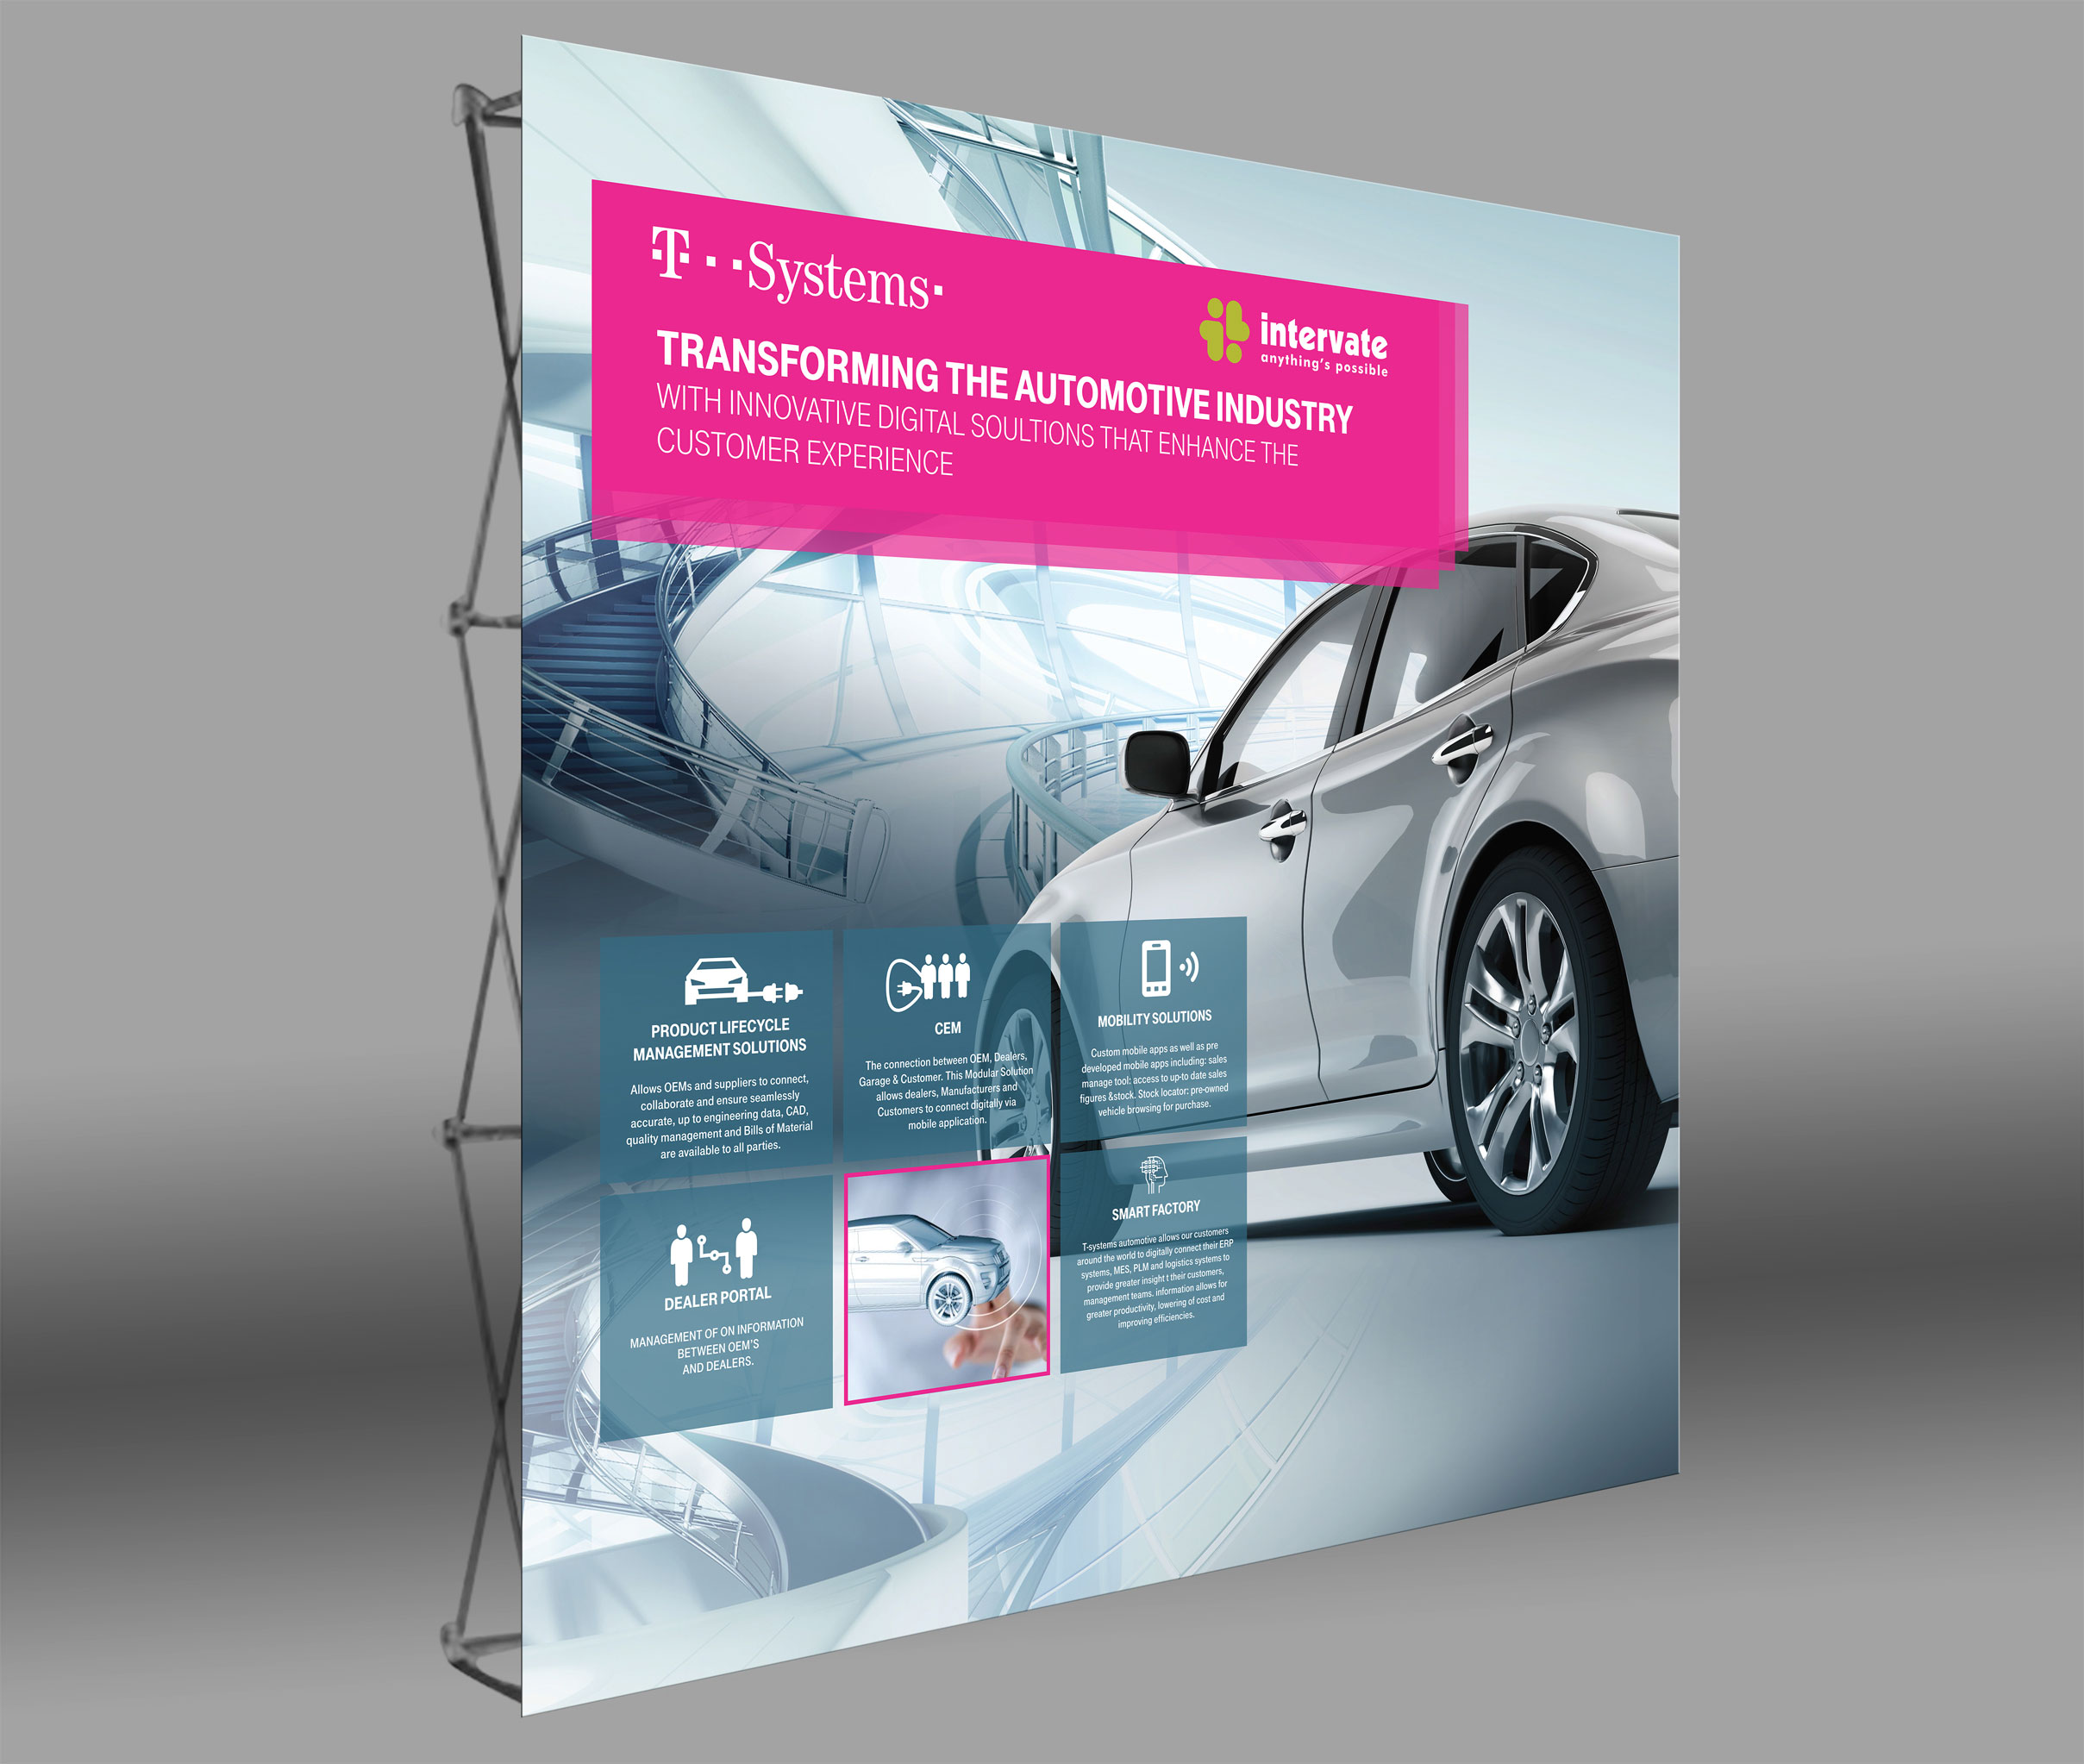 T-Systems-Wall-Banner-Transforming-the-Automotive-Industry